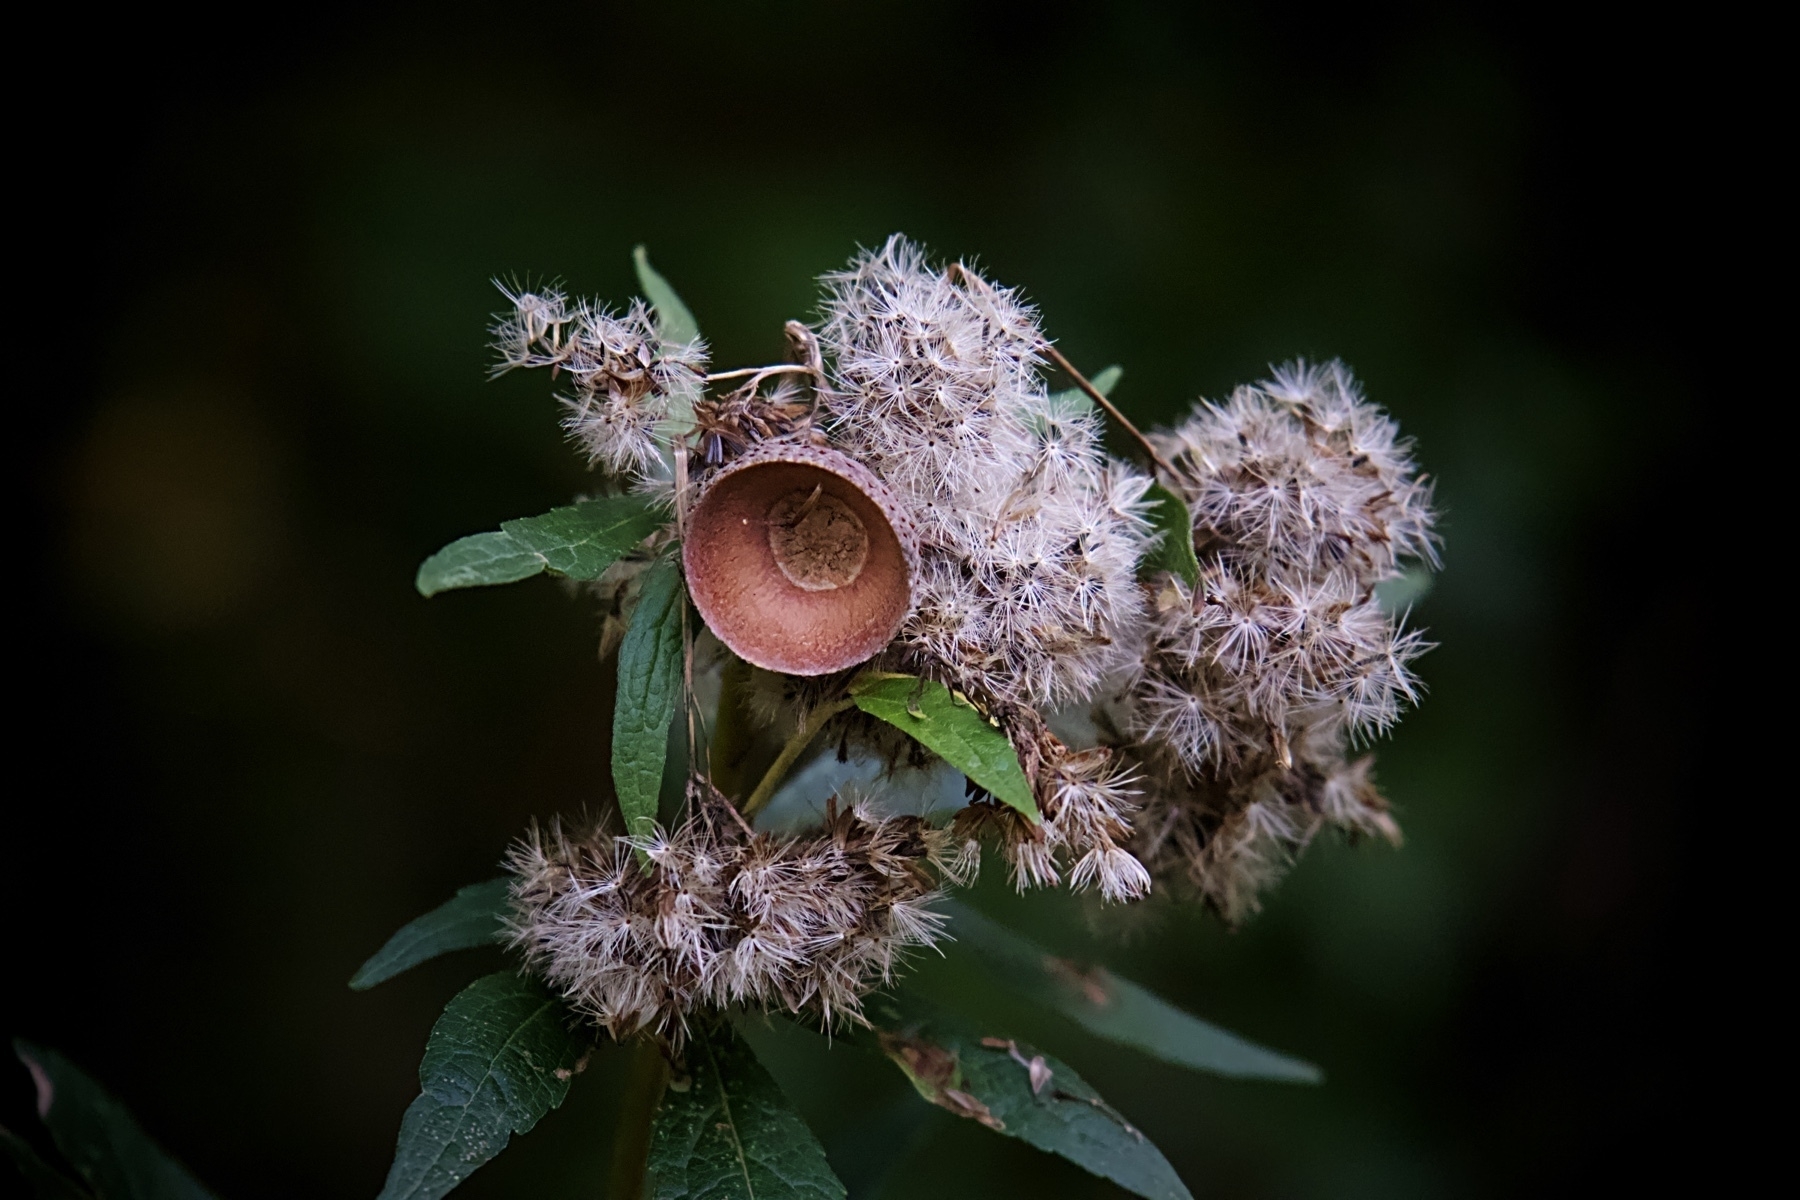 An acorn cup lodged in another plant.